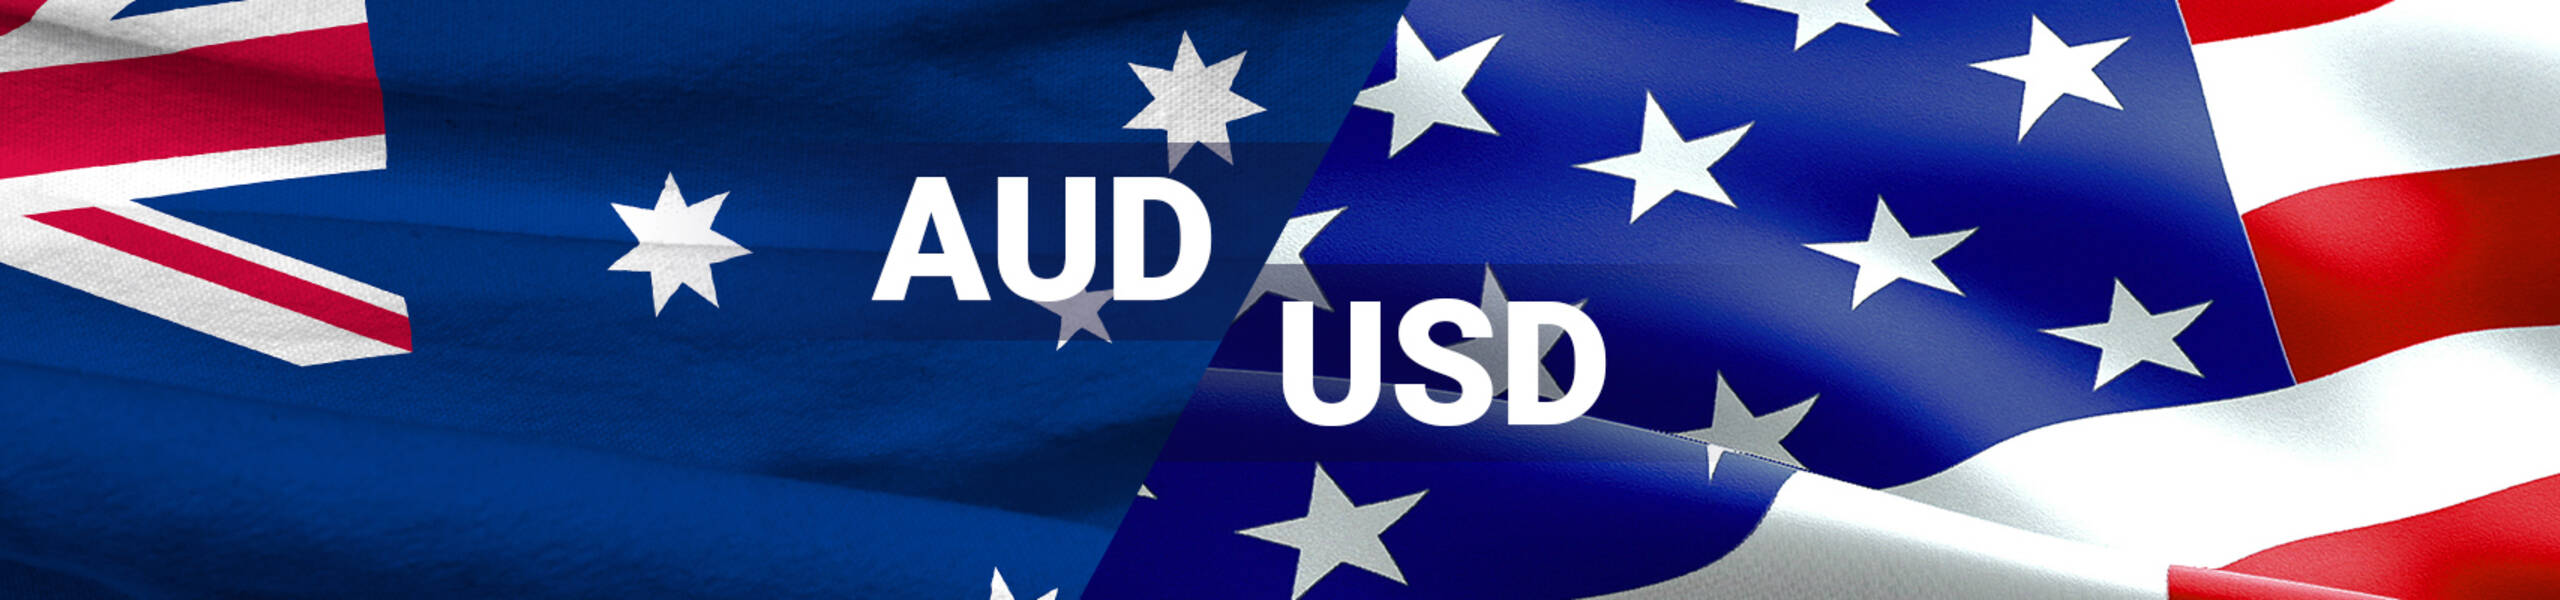 AUD/USD: new lows of 2018 